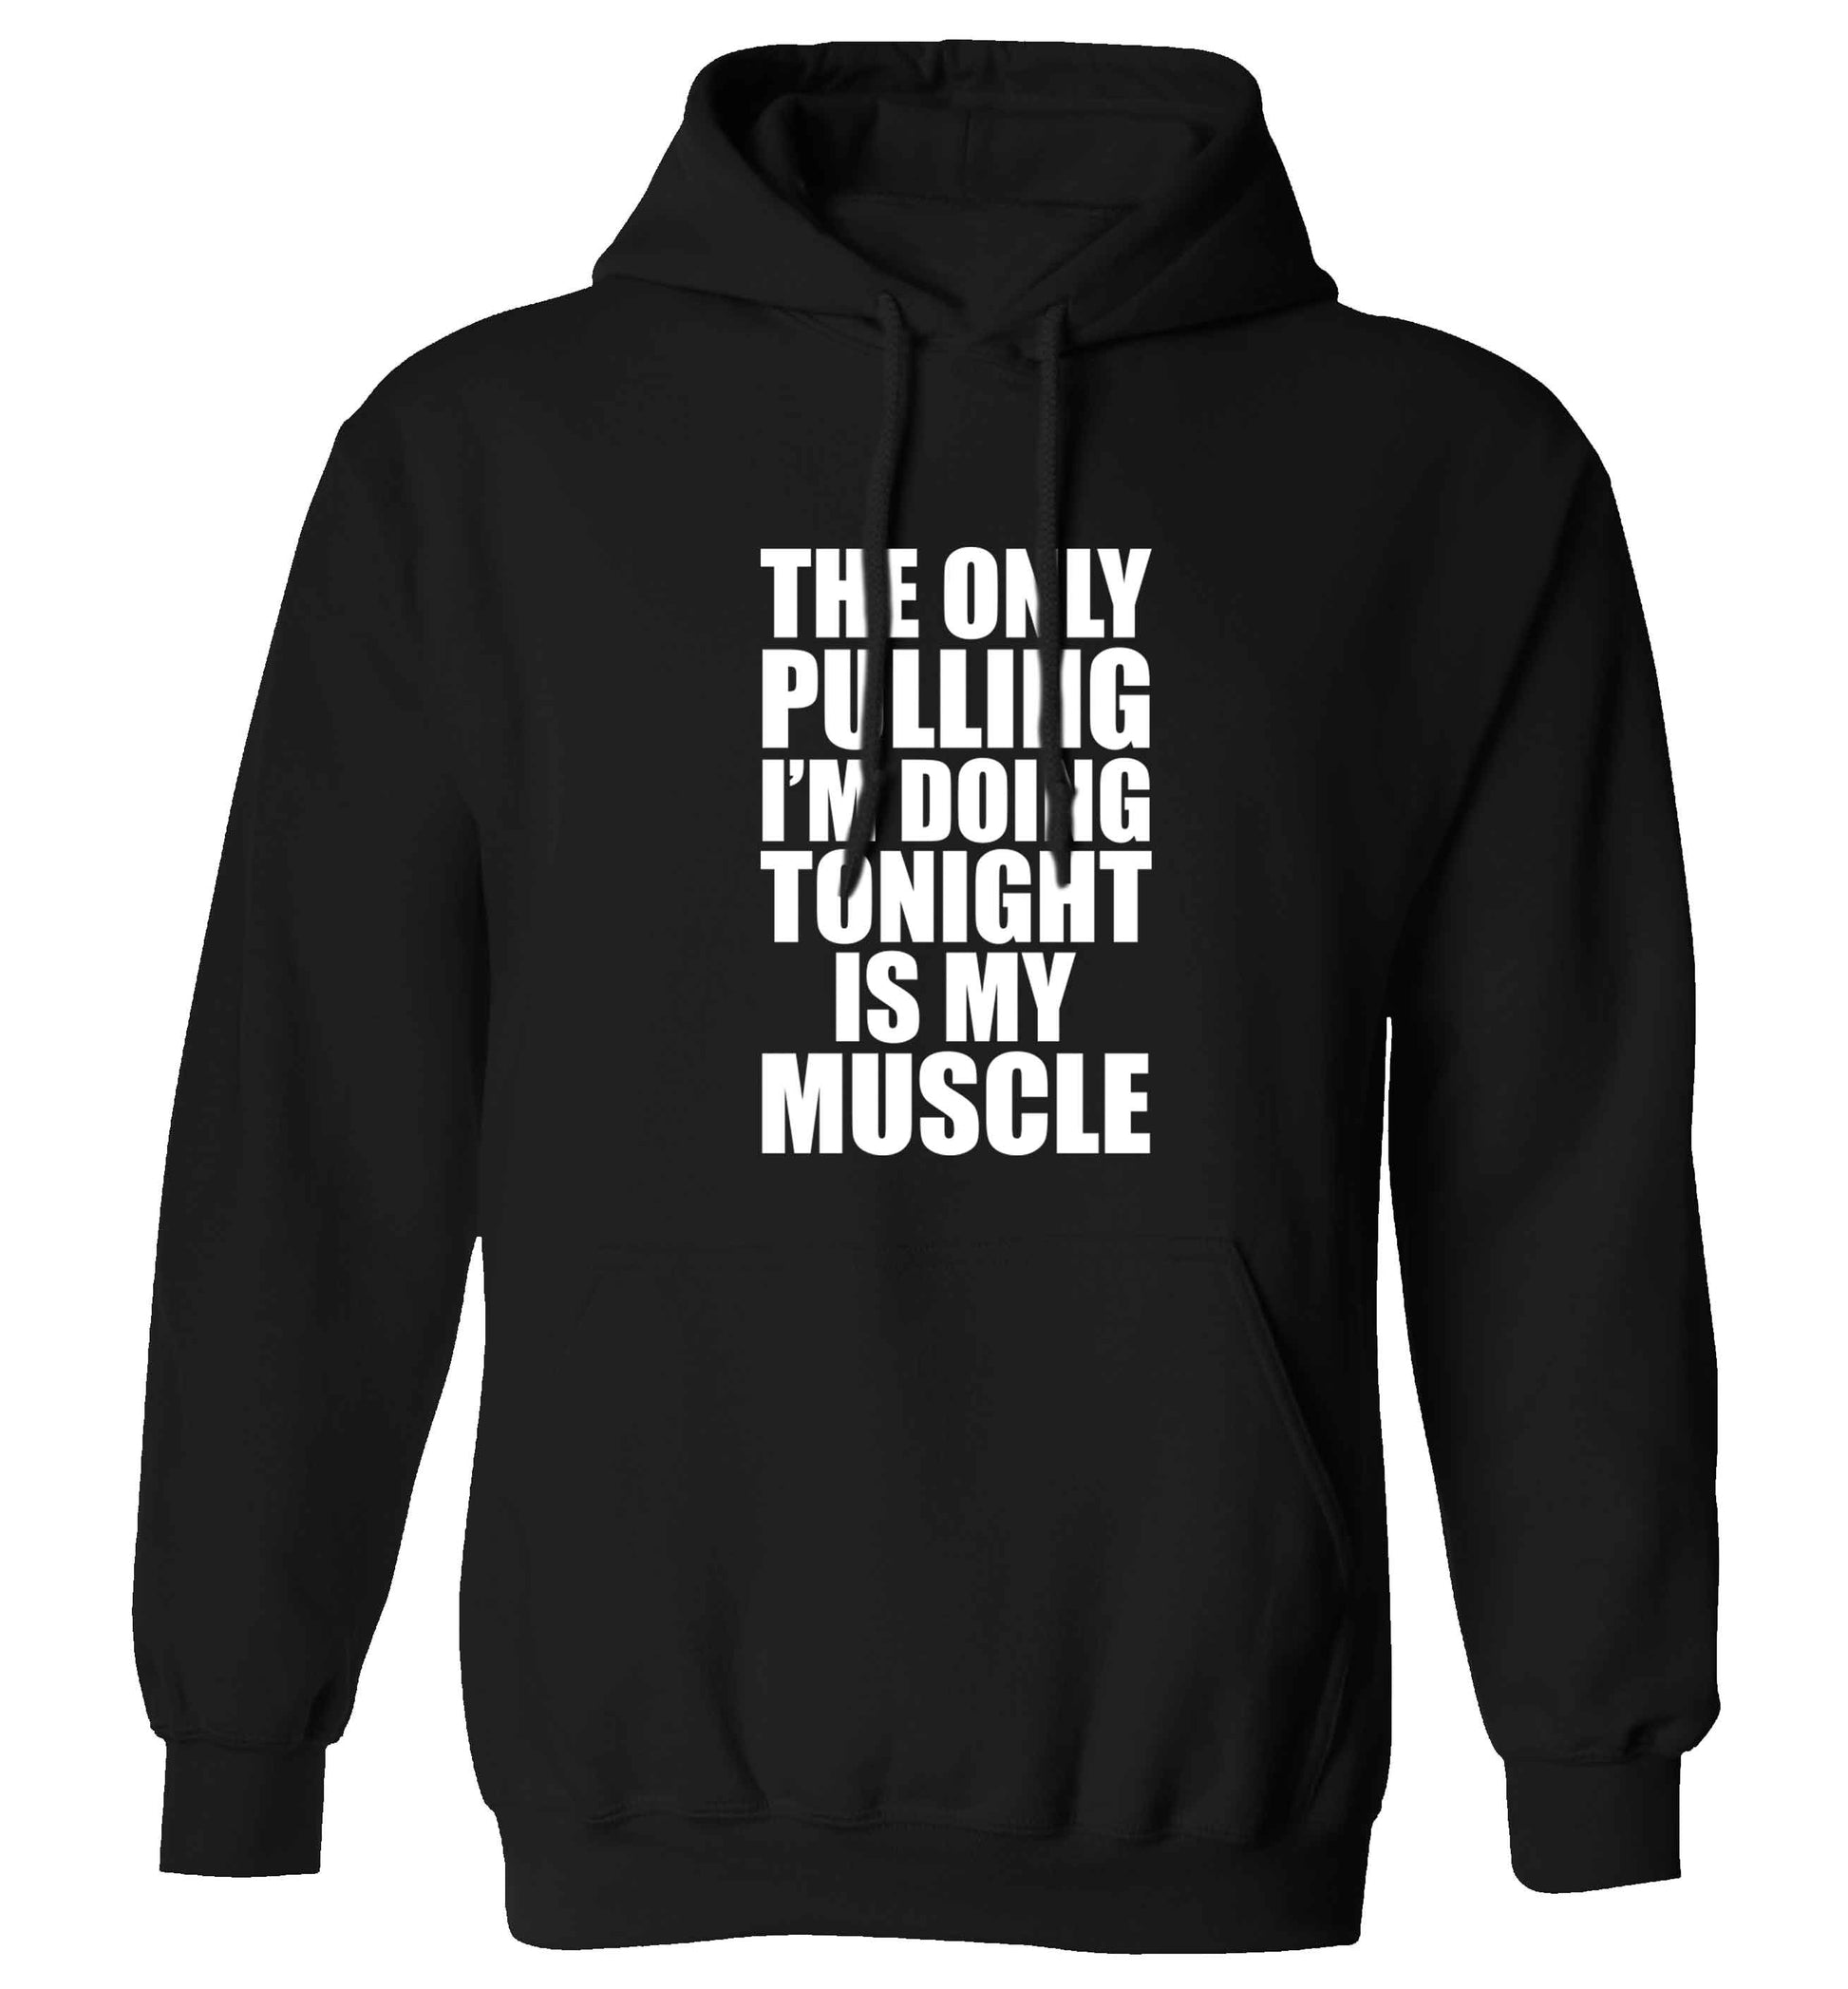 The only pulling I'm doing tonight is my muscle adults unisex black hoodie 2XL